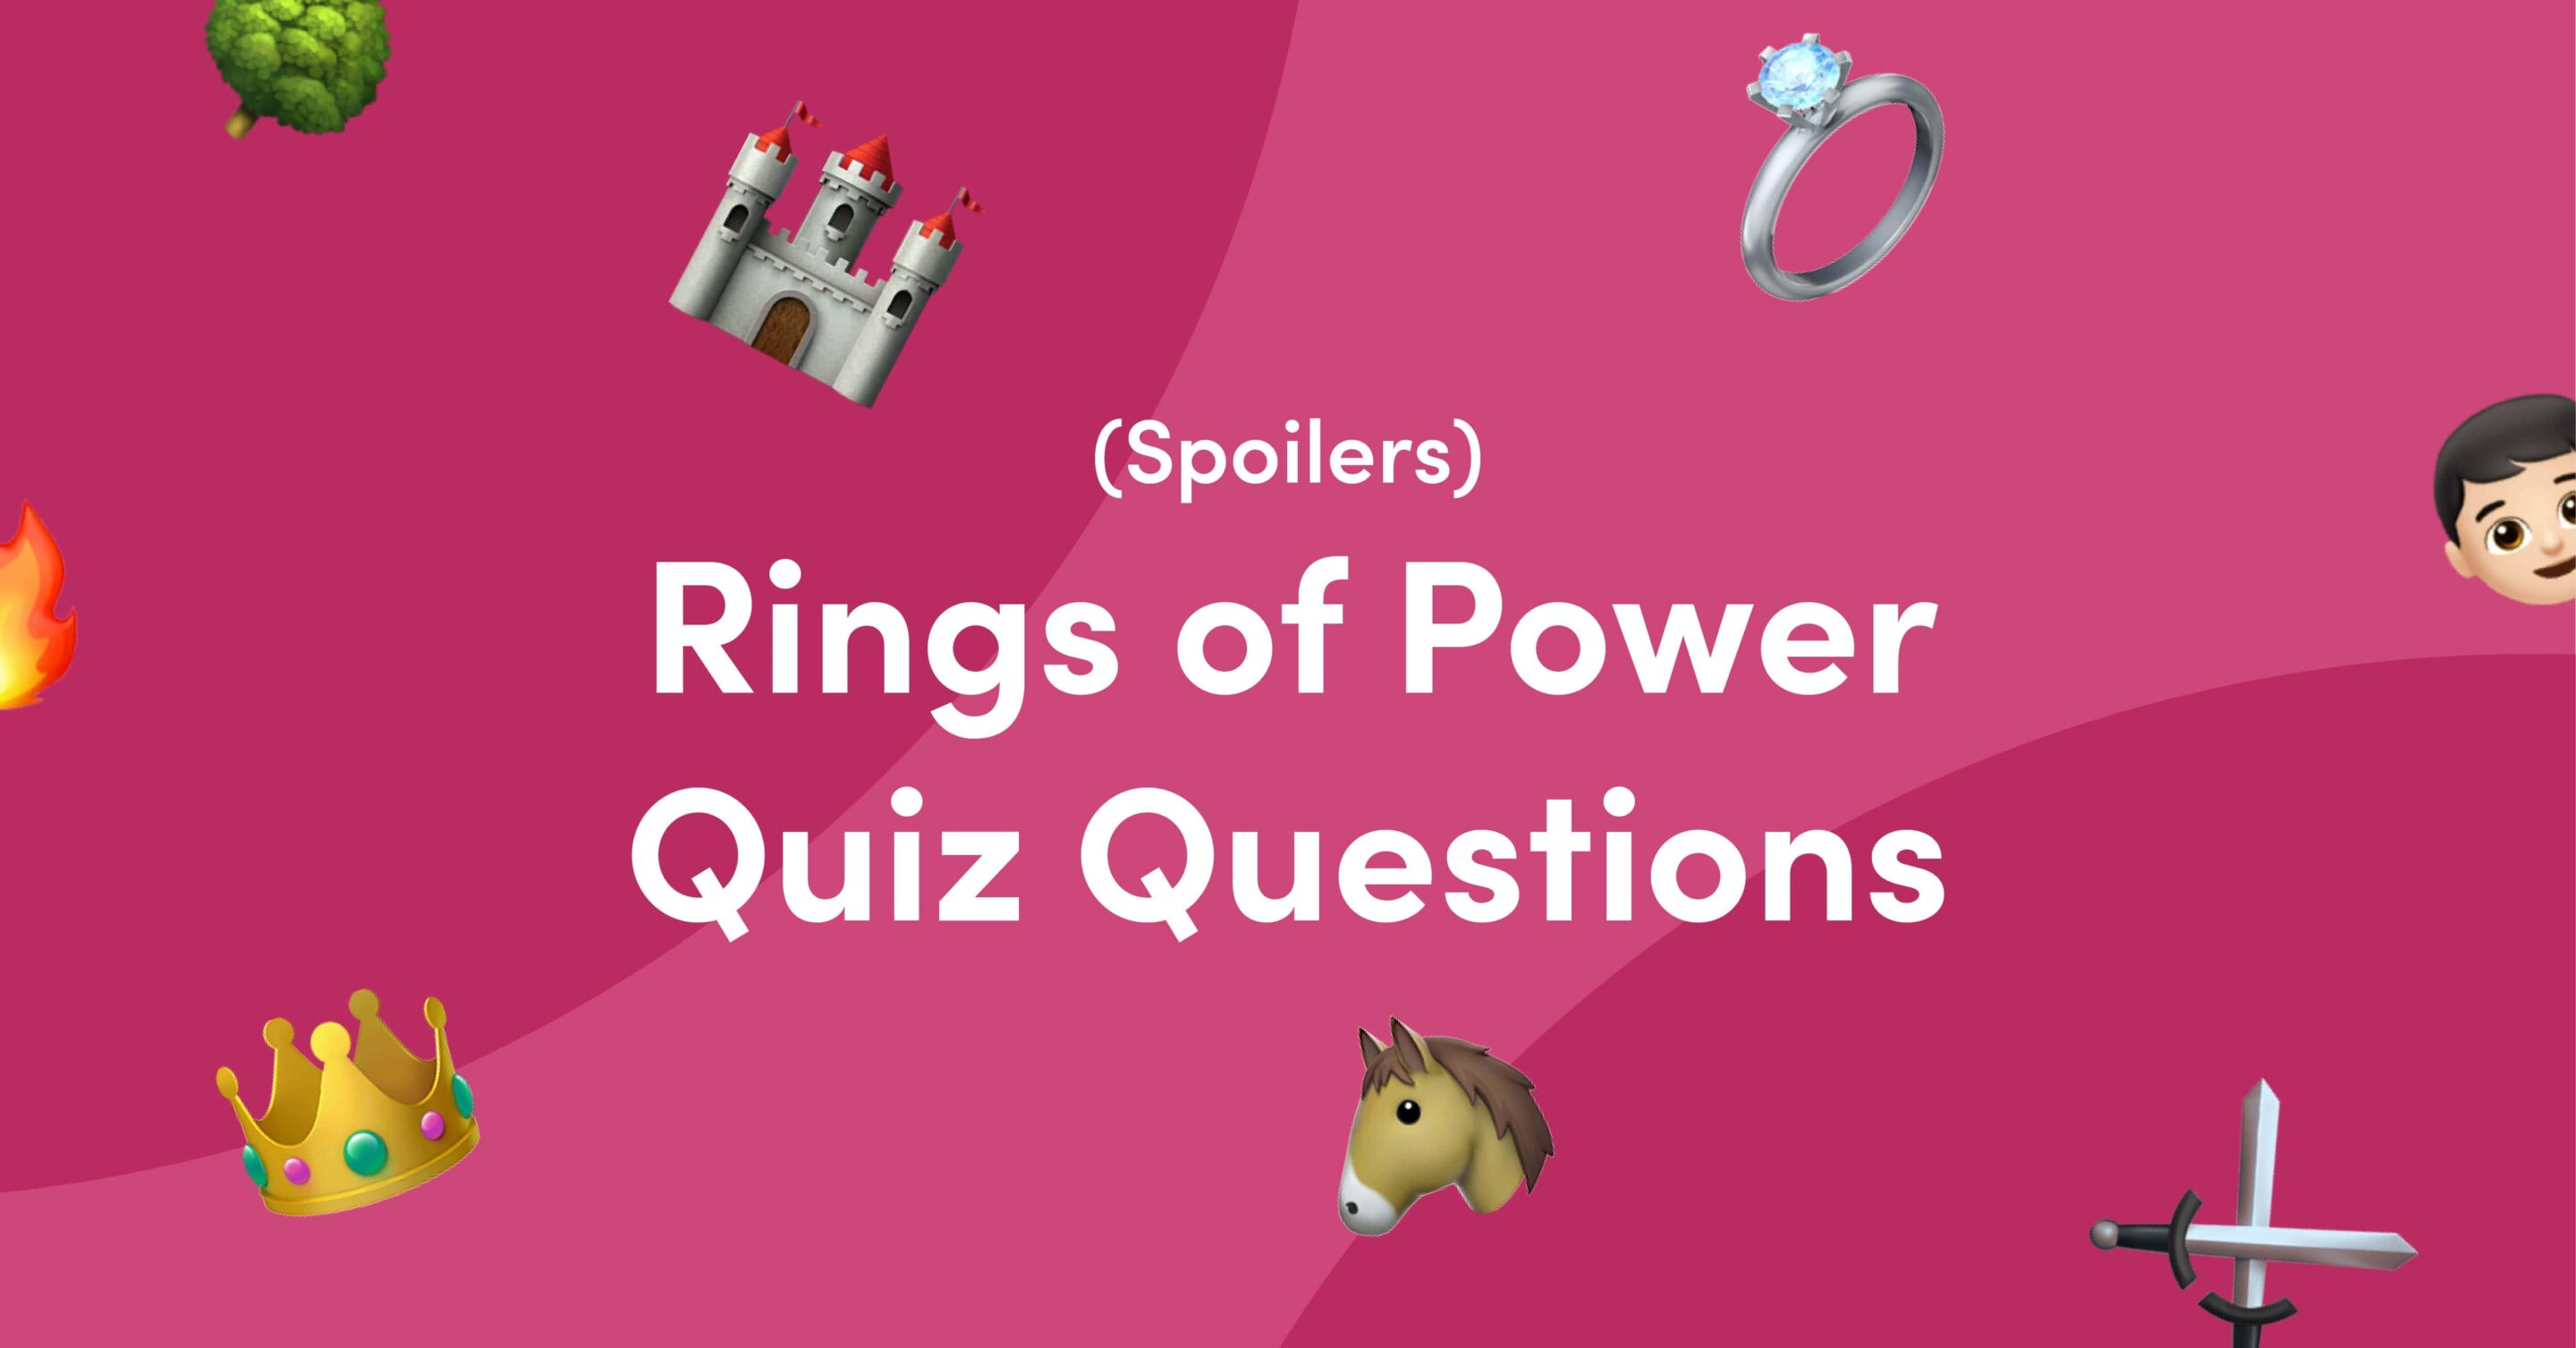 Emojis on pink background for rings of power quiz questions and answers with spoilers